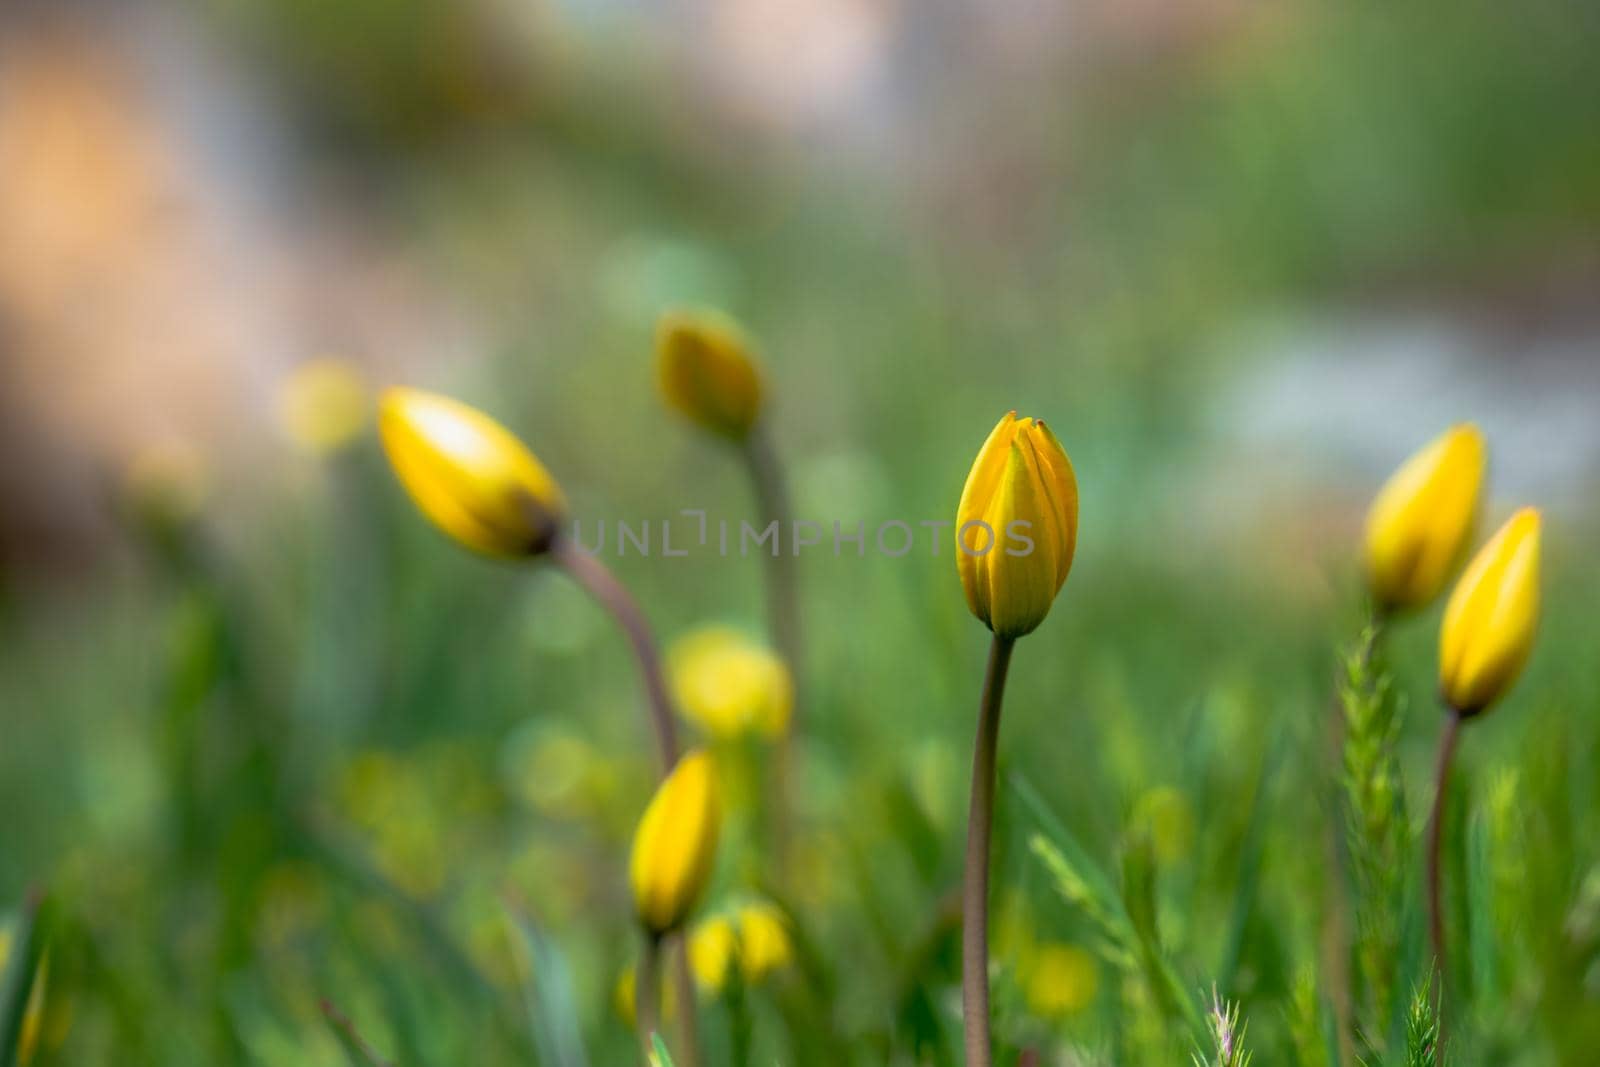 Grass flower in soft focus and blurred with vintage style for background. Close up spring tulip flowers background in morning nature